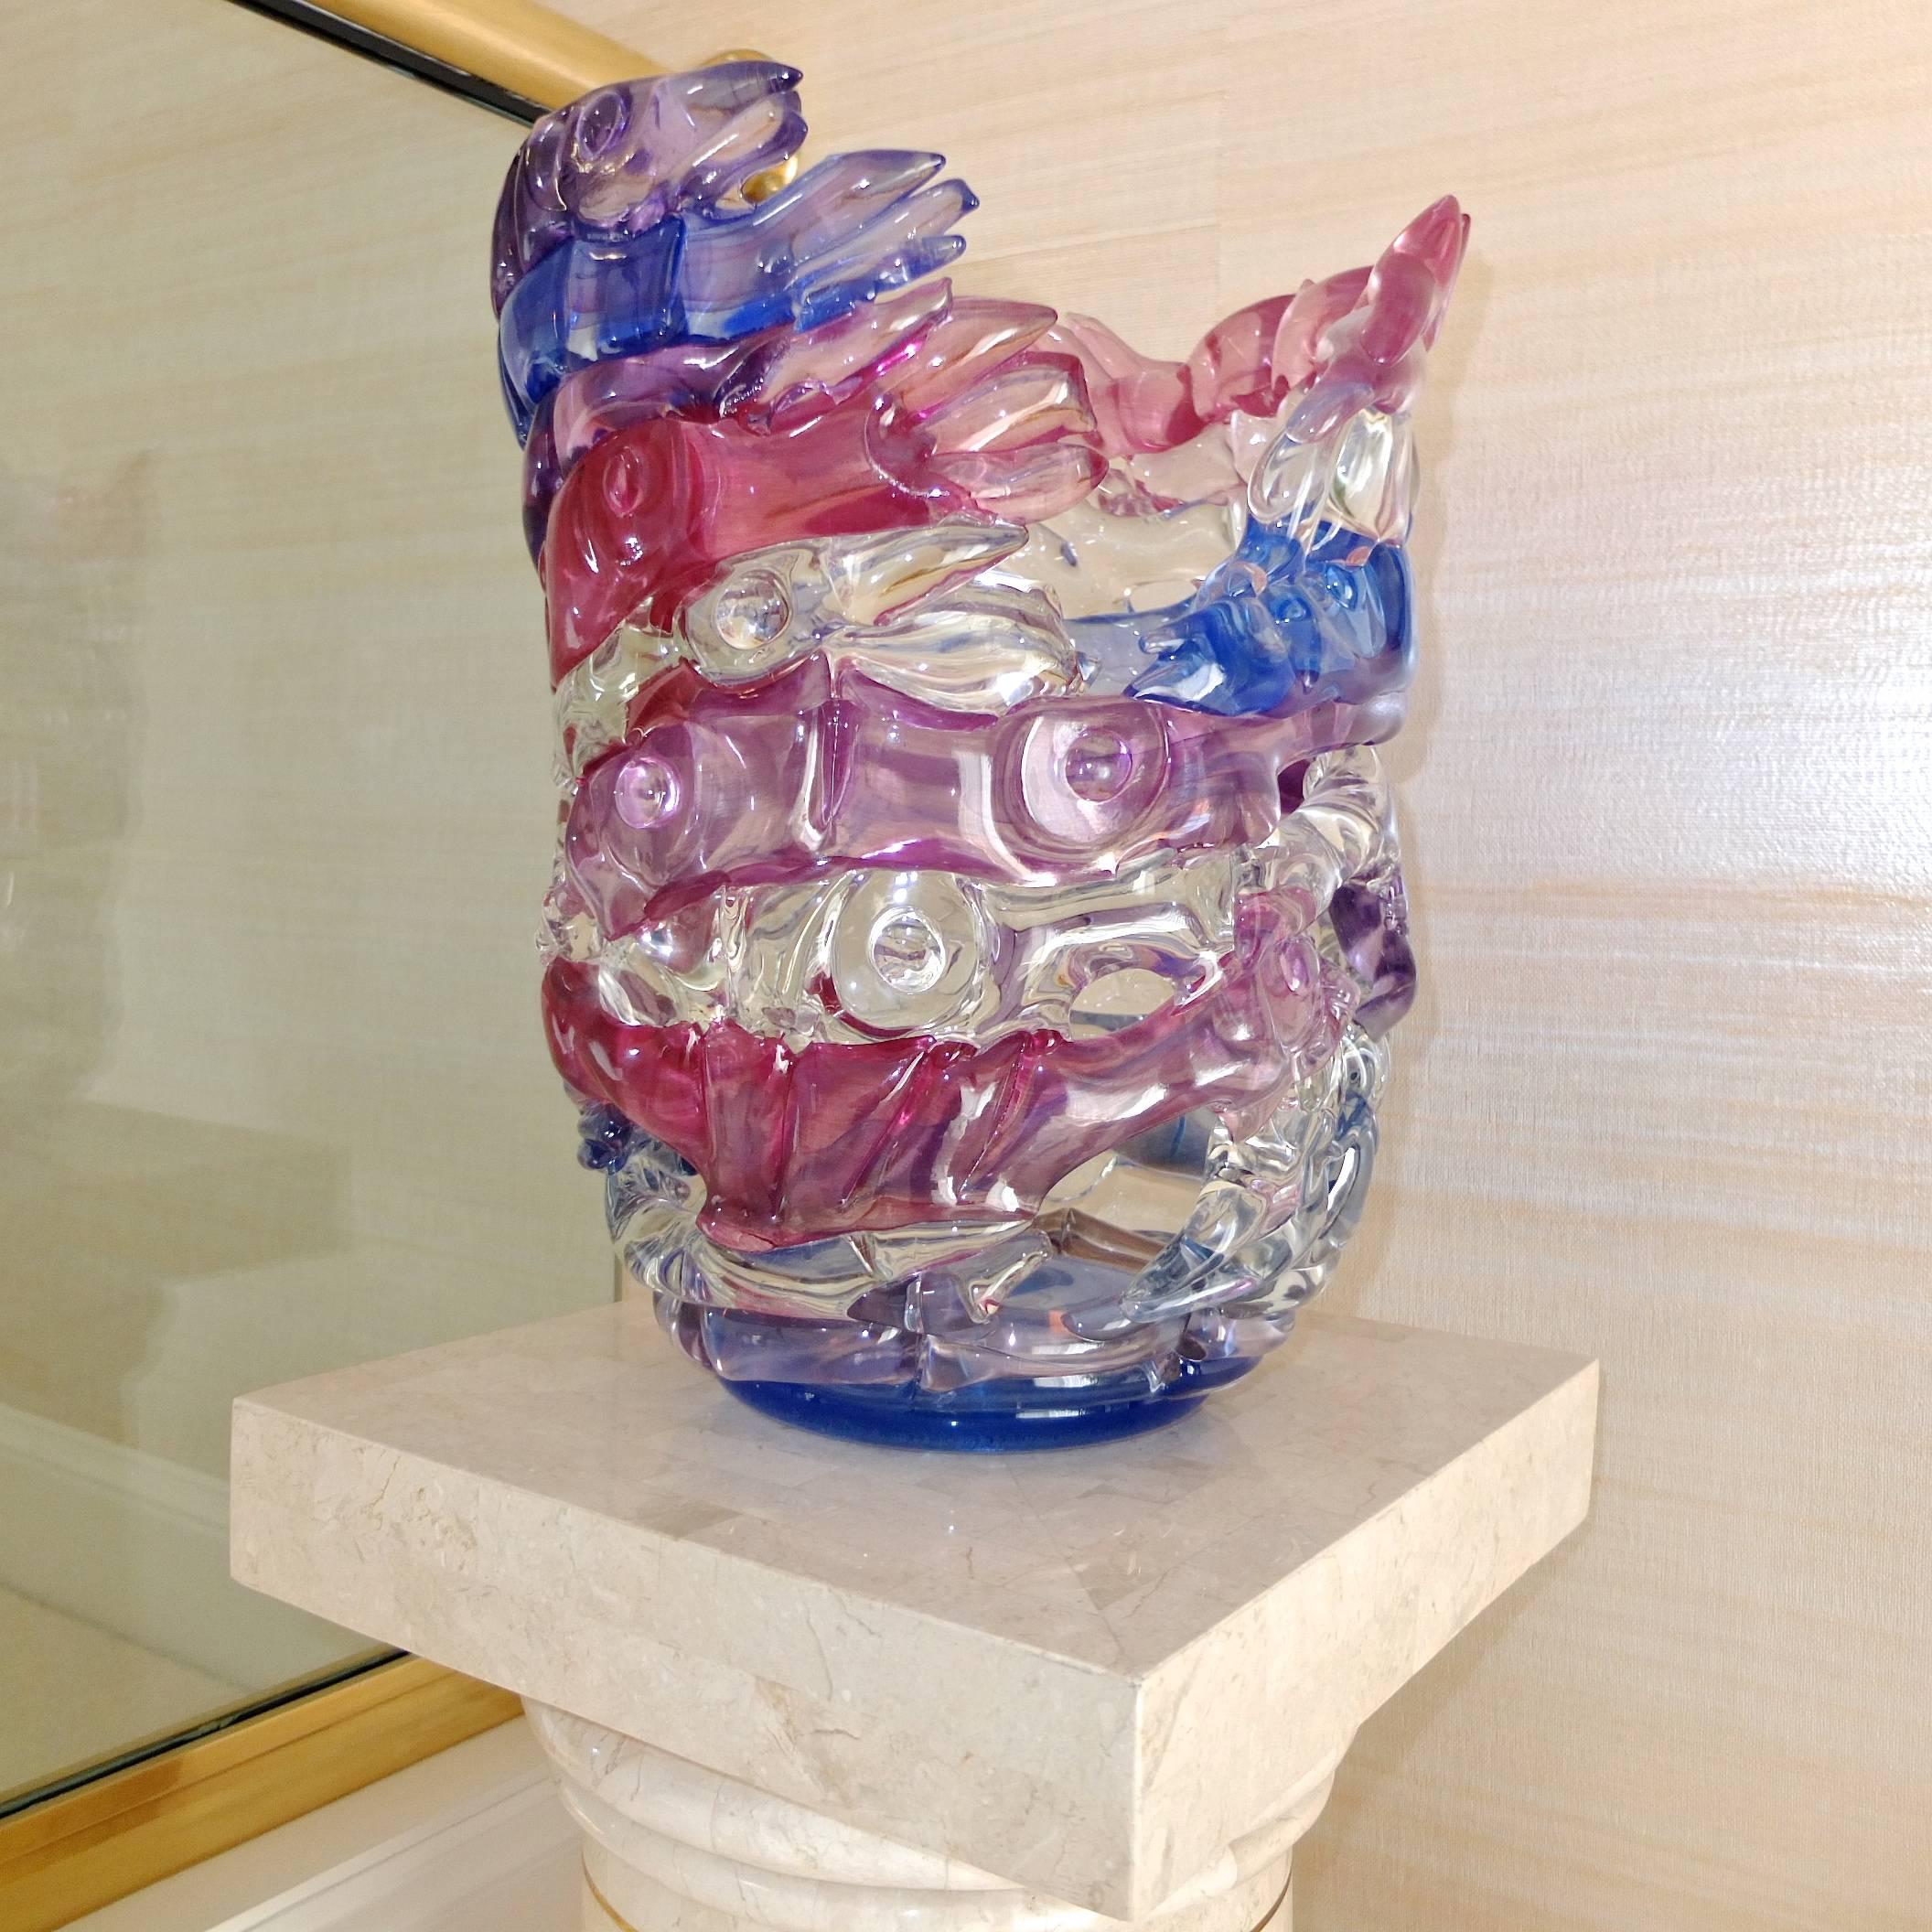 Art glass vase by Tom Philabaum from his "Handbuilt" series, circa 1987.

Tom Philabaum received a B.A. in Art and Education from Southern Illinois University in 1969, and then joined the innovative Glass Program at the University of